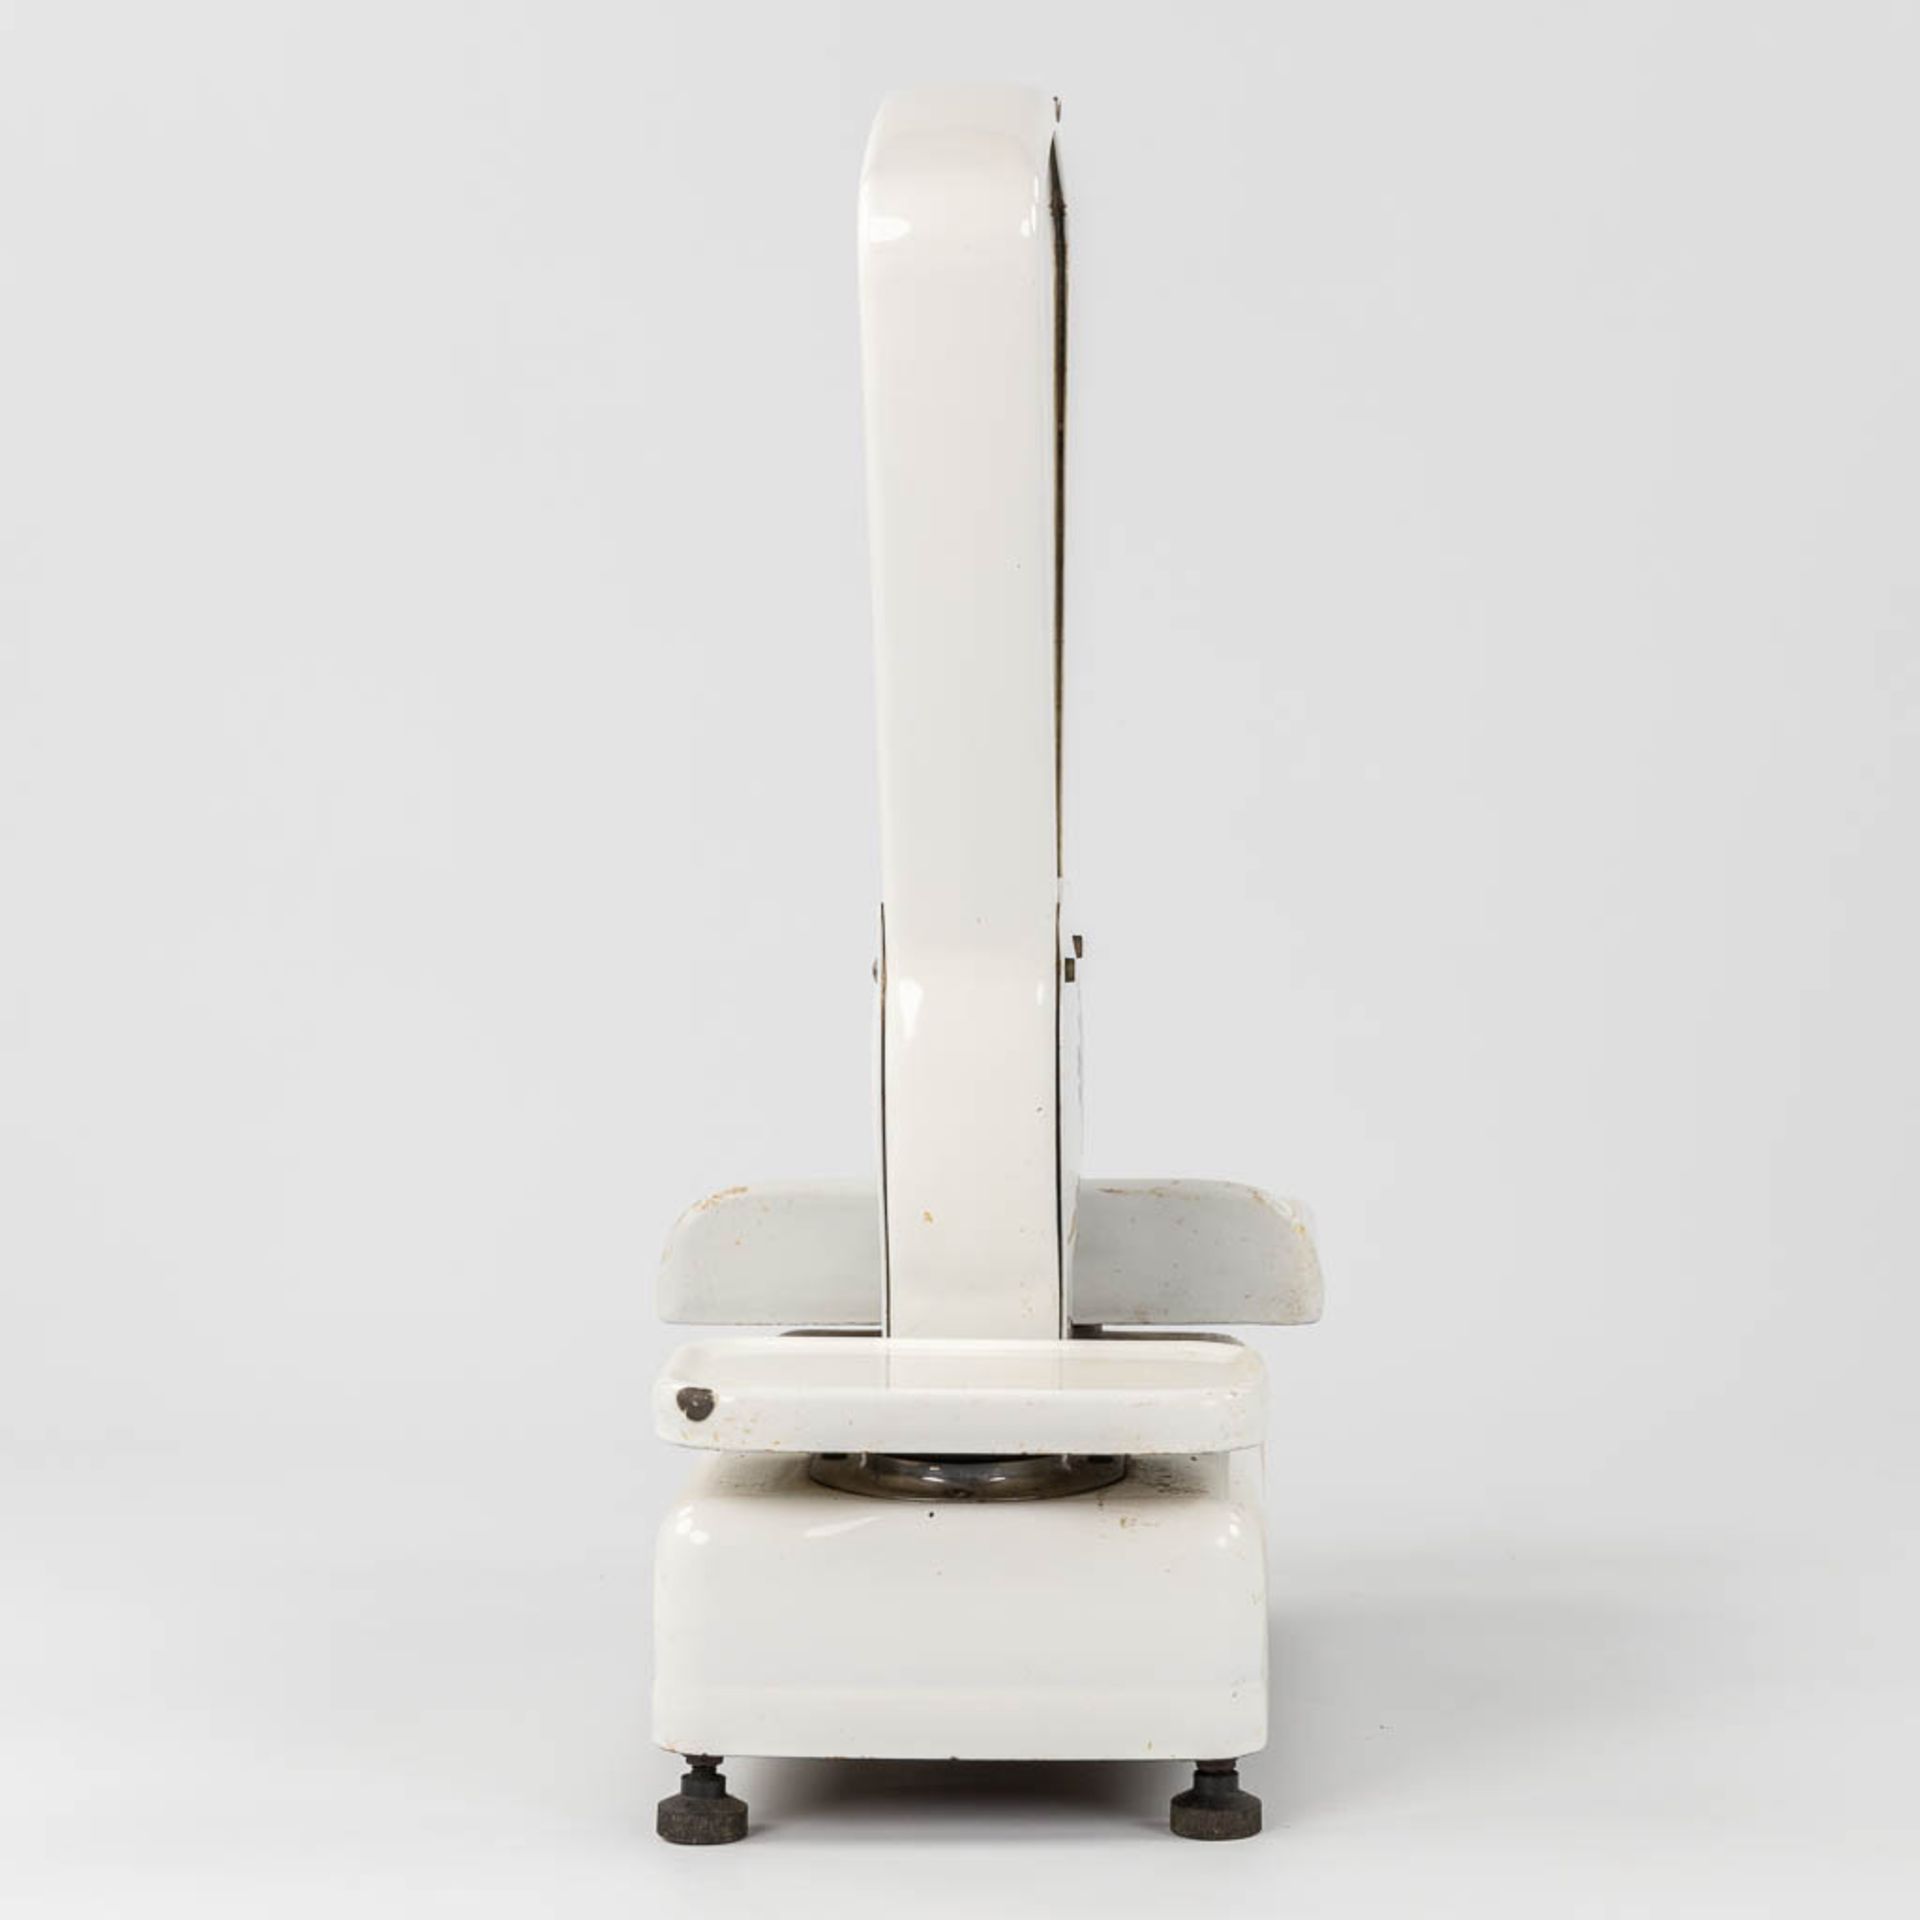 Berkel, two scales, enamelled and inox. (L:28 x W:55 x H:68 cm) - Image 7 of 15